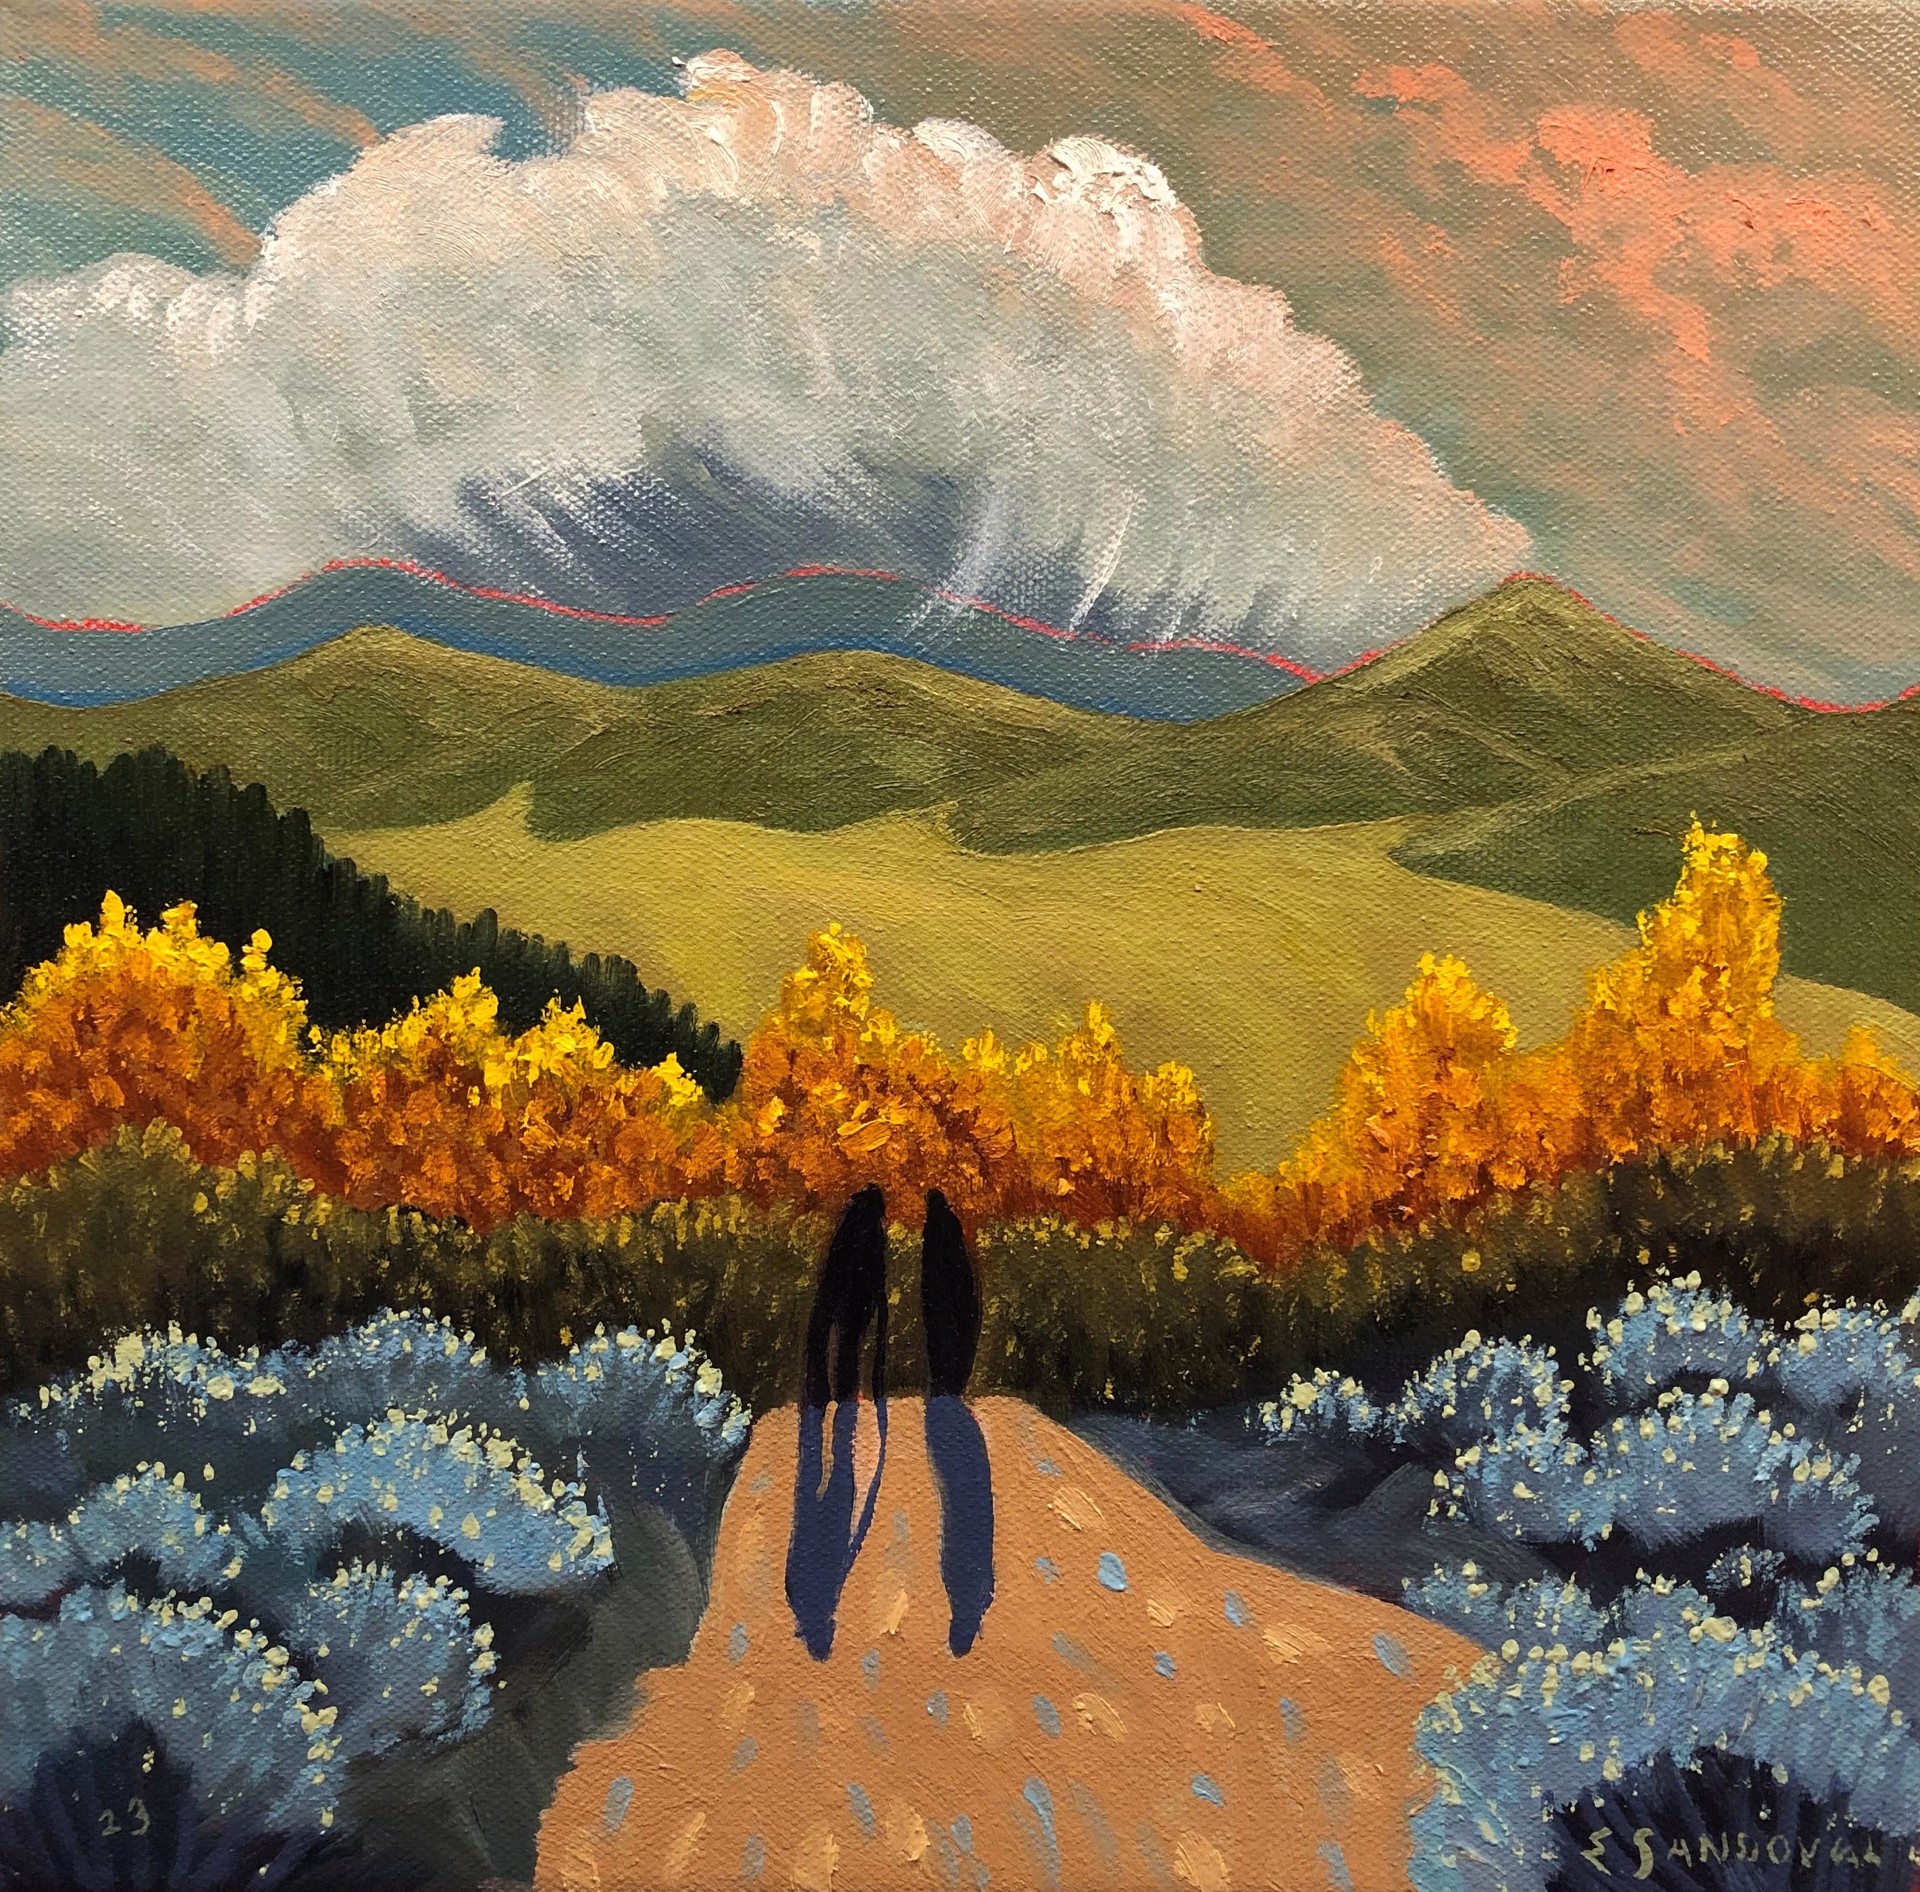 Walking to the Valley by Ed Sandoval